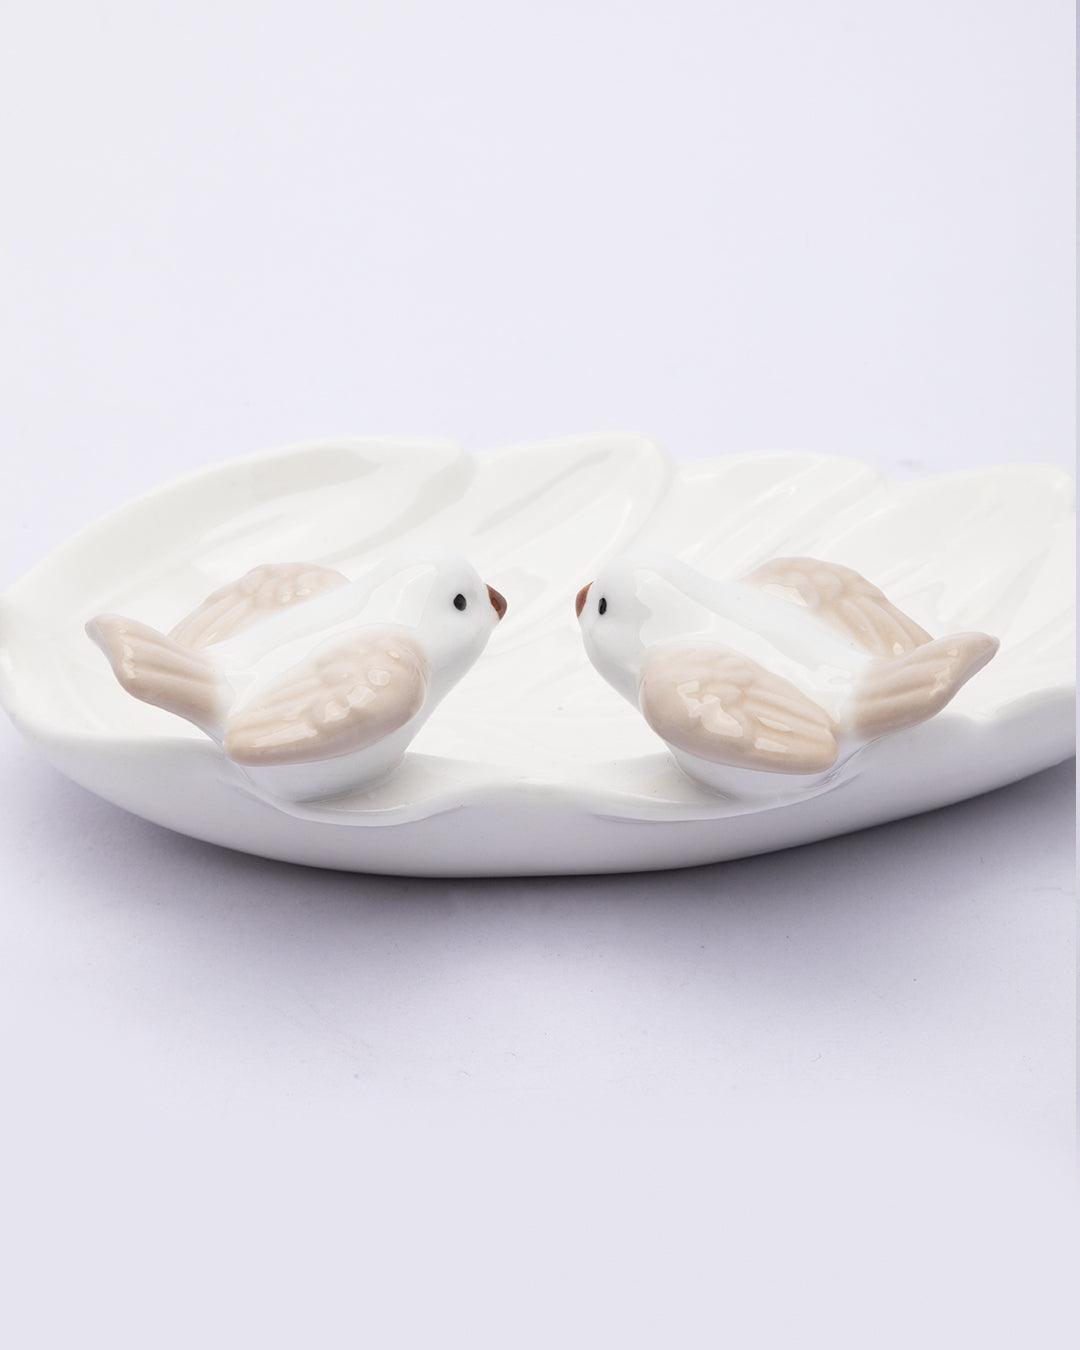 Jewellery Holder Tray, Crafted Bird, for Dressing Table, Ring Dash, Triangle, White, Ceramic, - MARKET 99